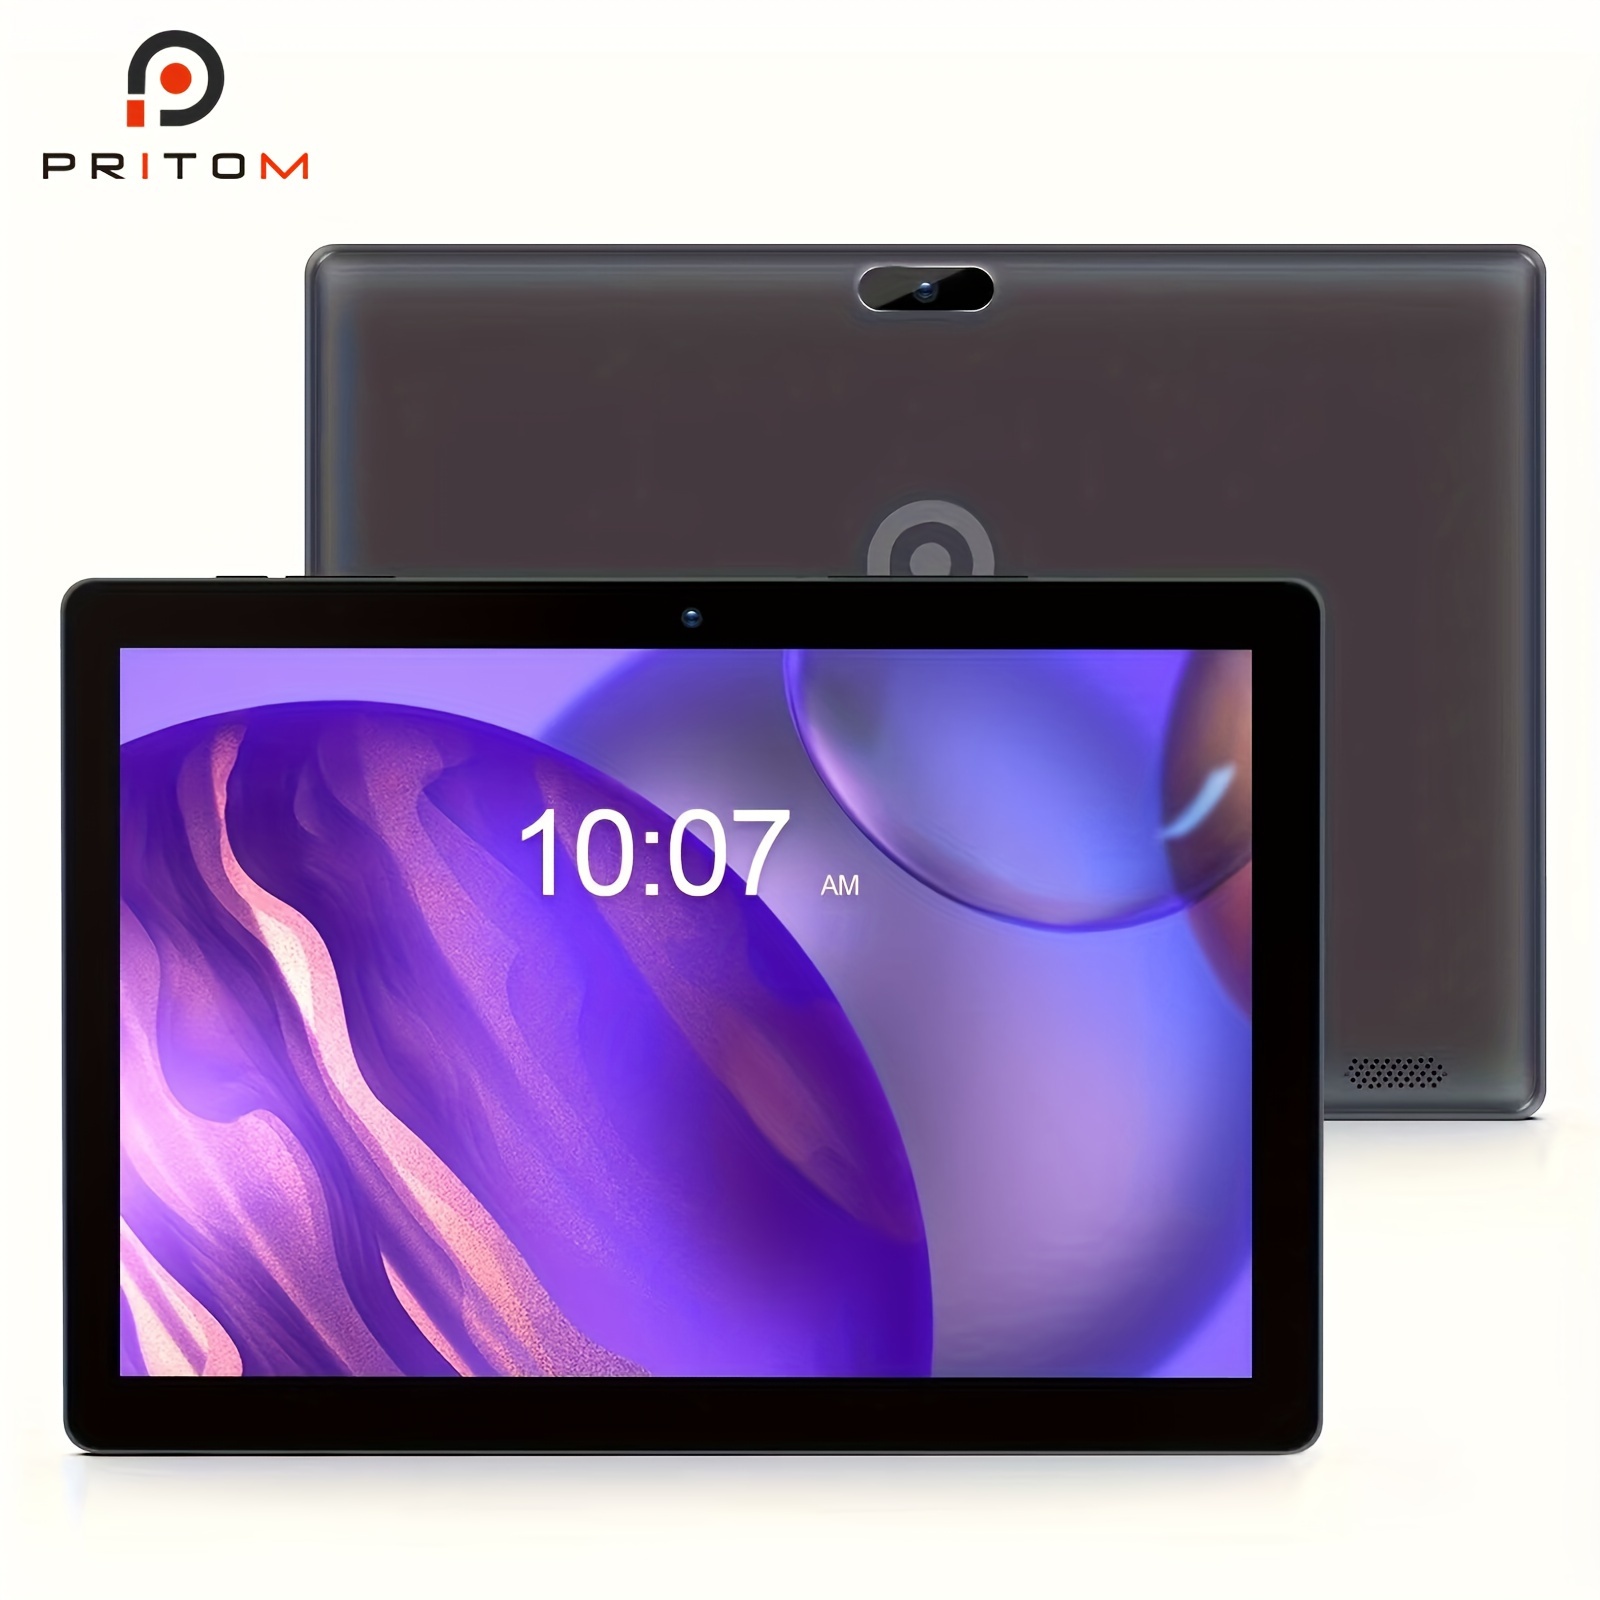 Android 13 Tablet 10 inch Tablets with 8GB RAM 64GB ROM 1TB Expand,  1280x800 IPS Touchscreen, WiFi 6, Dual Camera, 6000mAh Battery, GMS,  Quad-Core